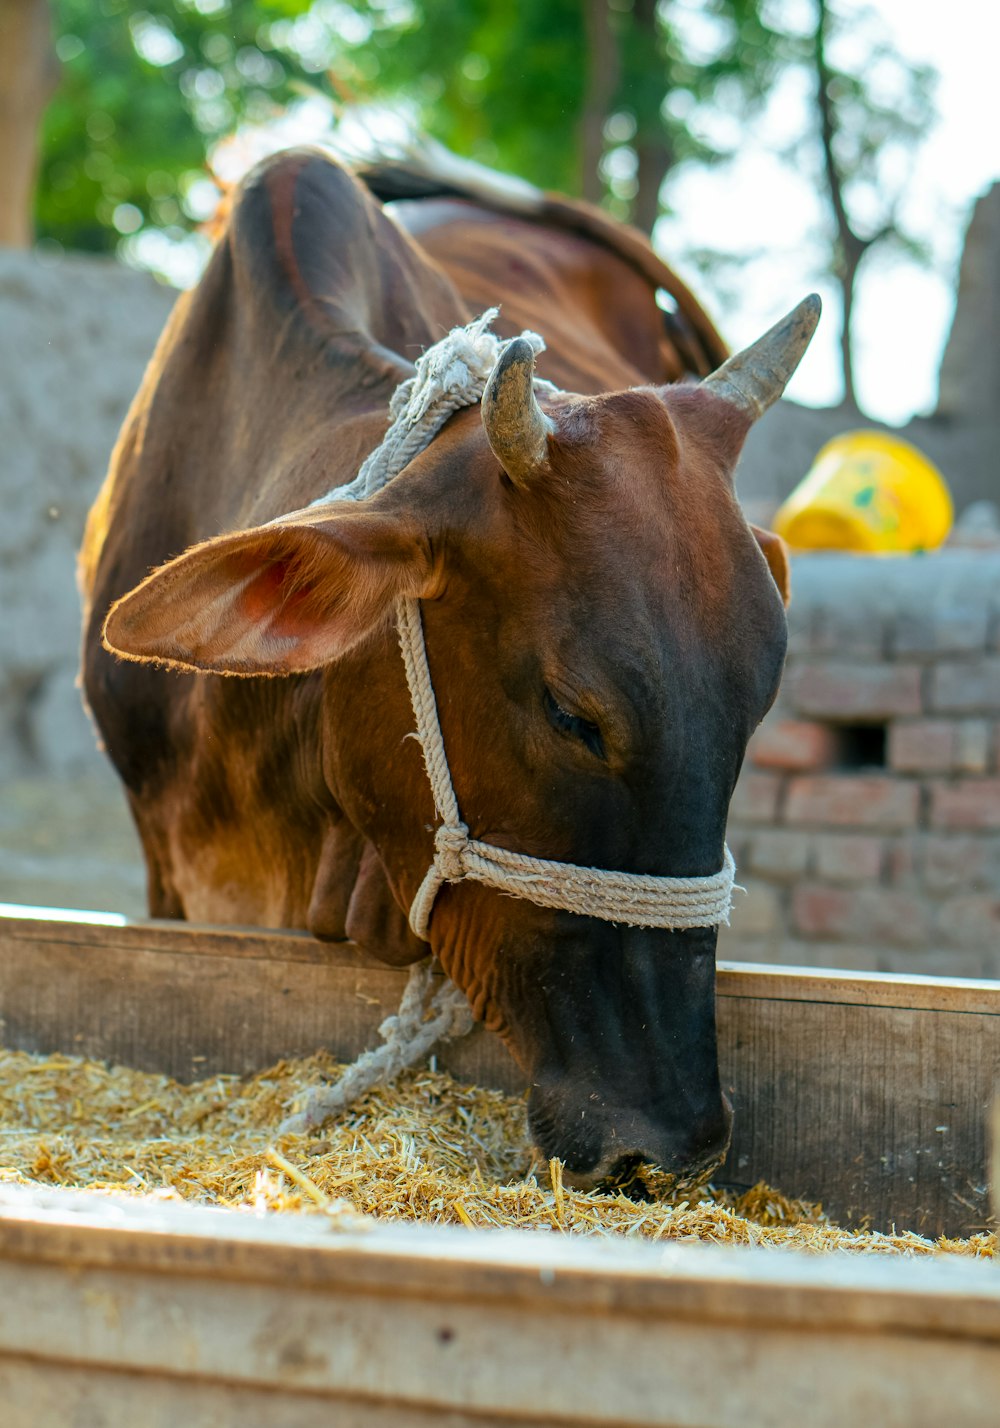 a cow with a rope tied around its neck eating hay